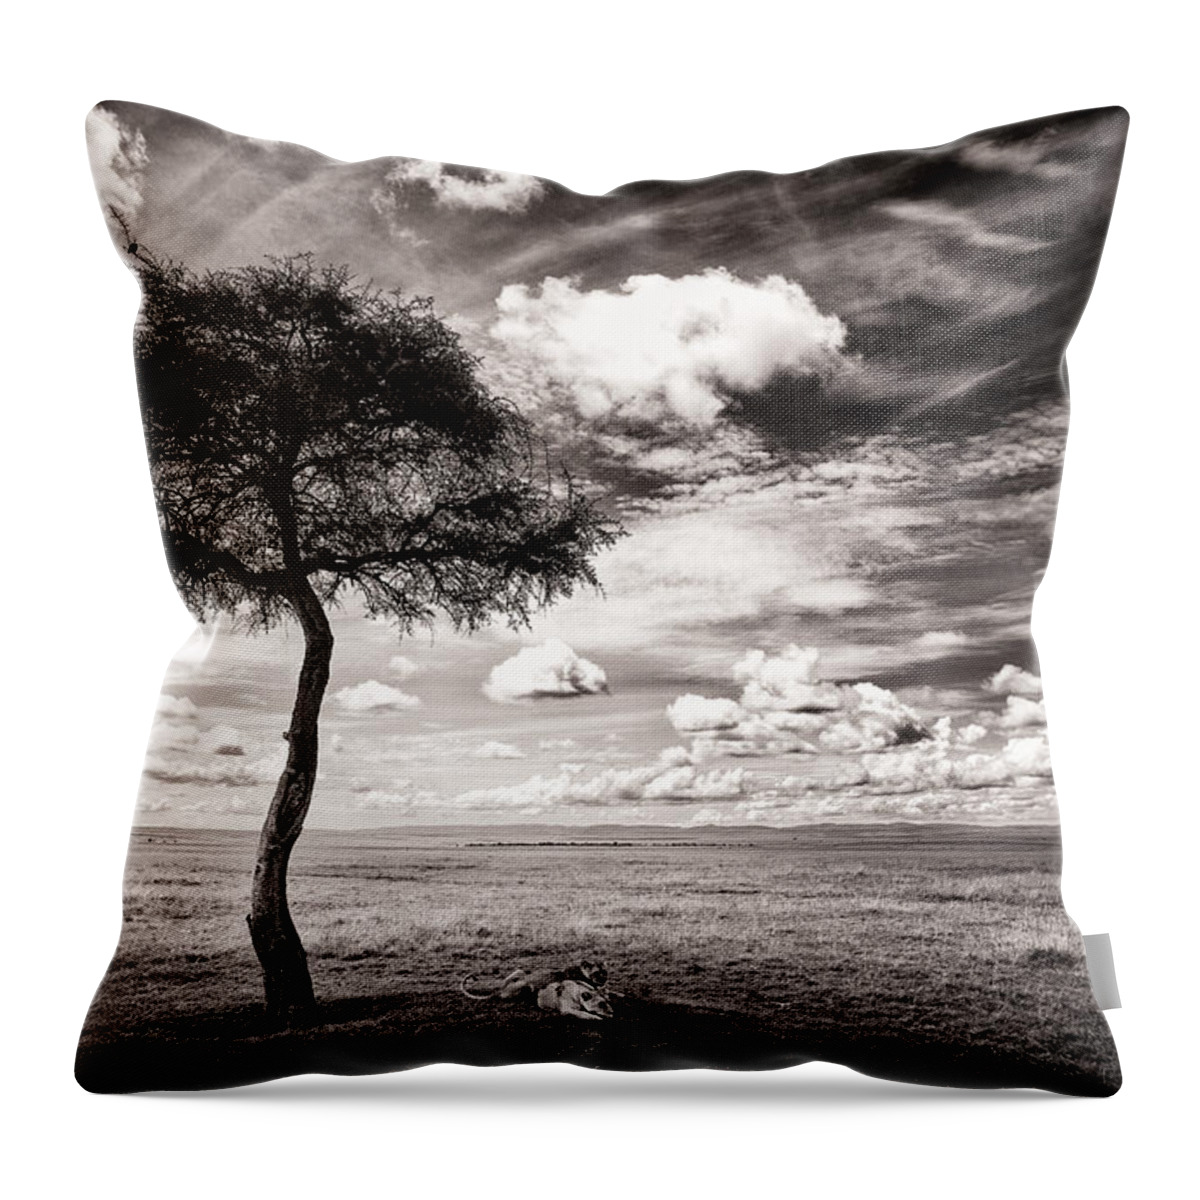 Africa Throw Pillow featuring the photograph Lions In The Shade - Selenium Toned #1 by Mike Gaudaur